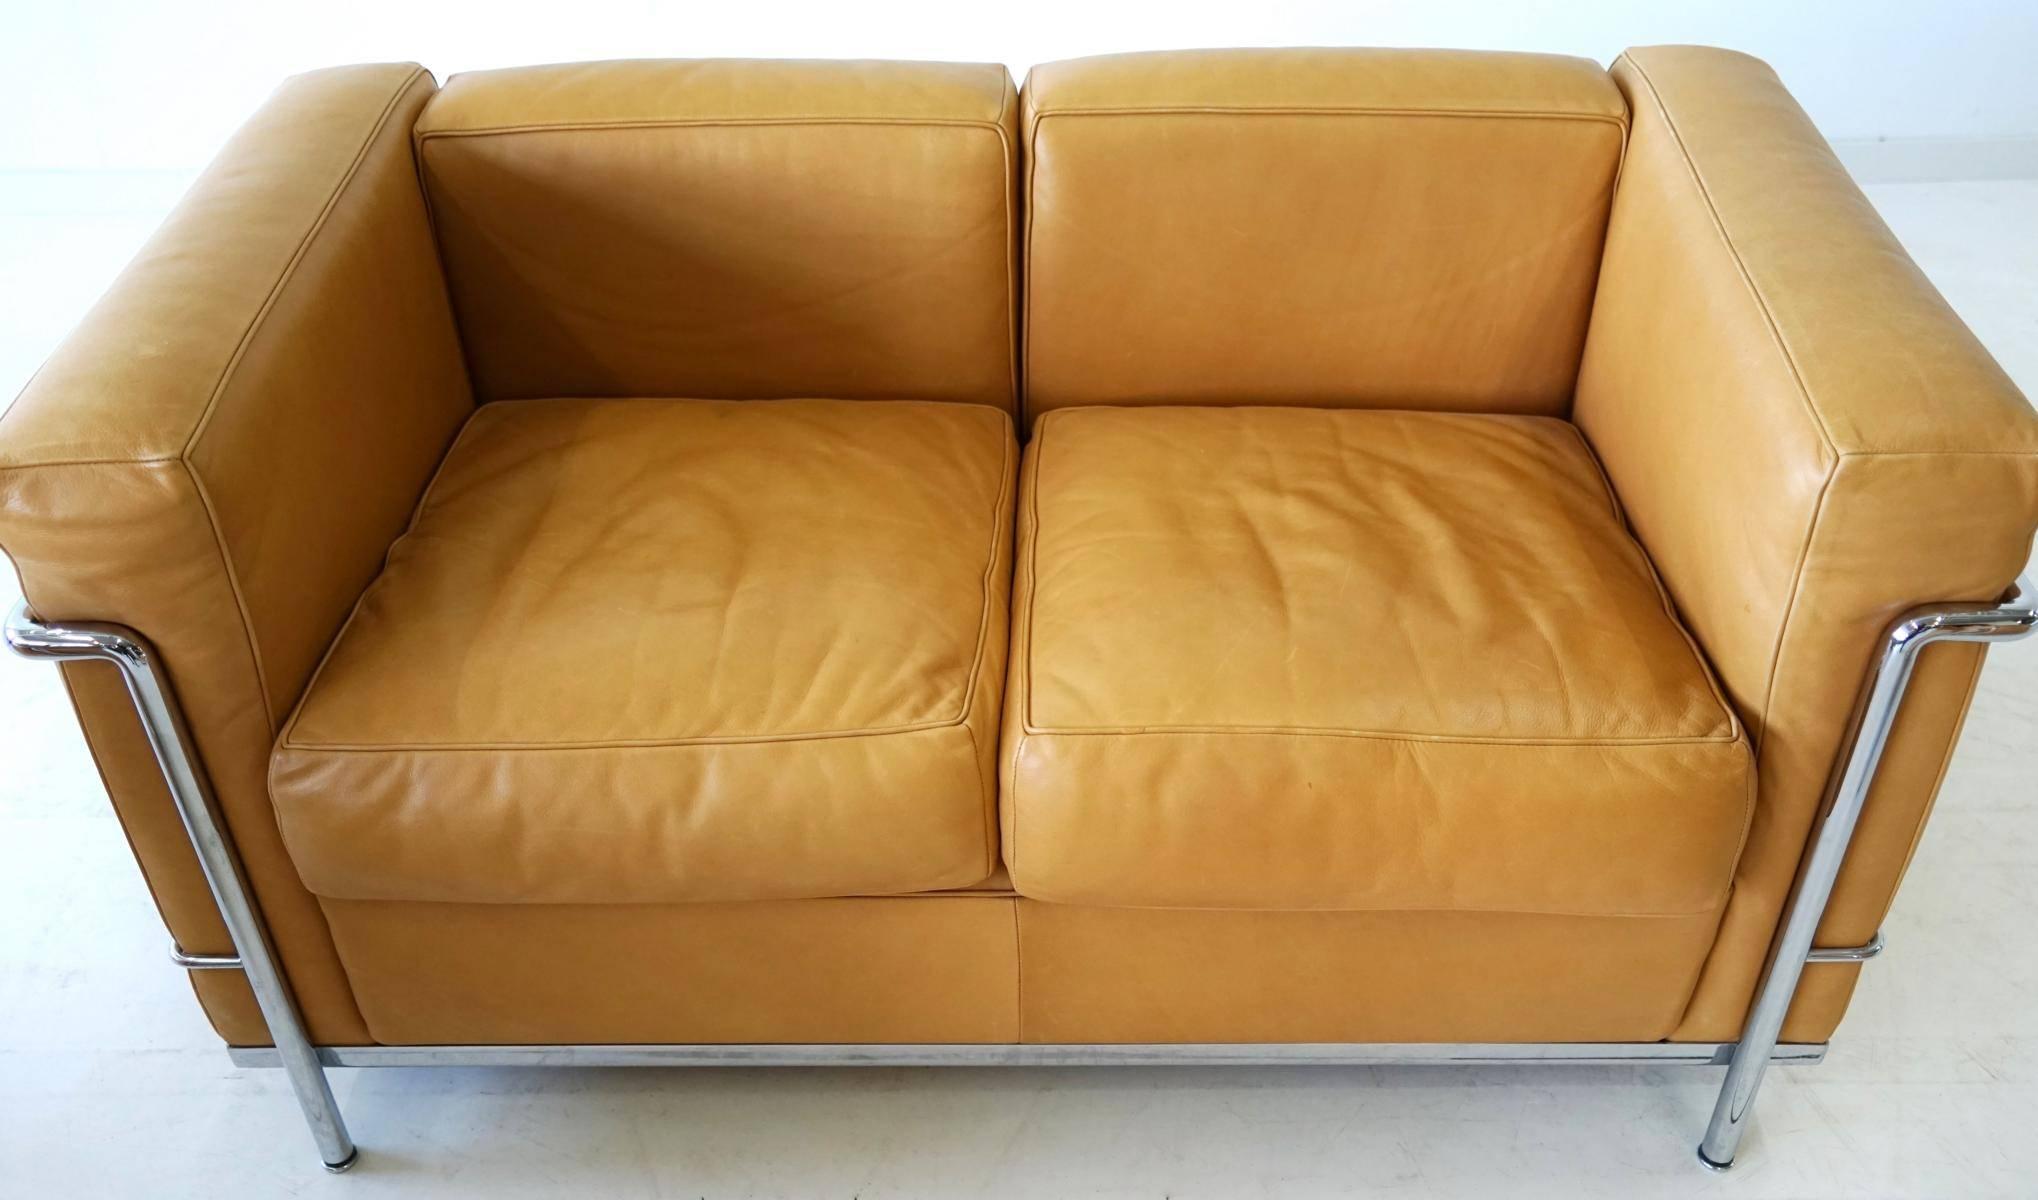 Mid-20th Century Original Le Corbusier LC 2 Seating Group Sofa and Two Chairs, Leather